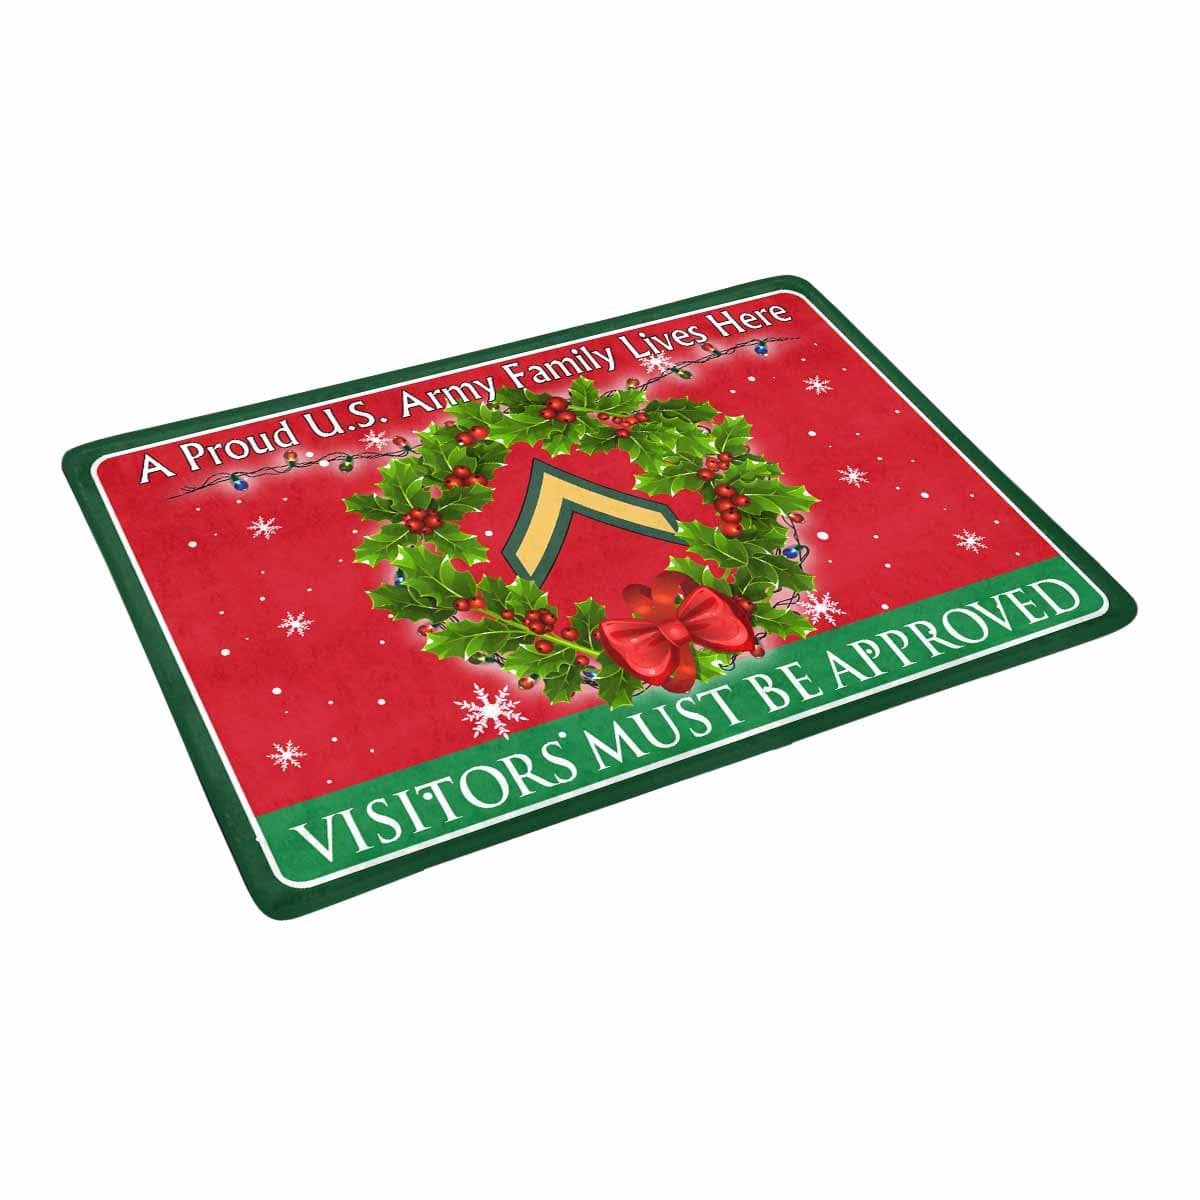 US Army E-2 PV2 E2 Private Second Class Ranks - Visitors must be approved Christmas Doormat-Doormat-Army-Ranks-Veterans Nation